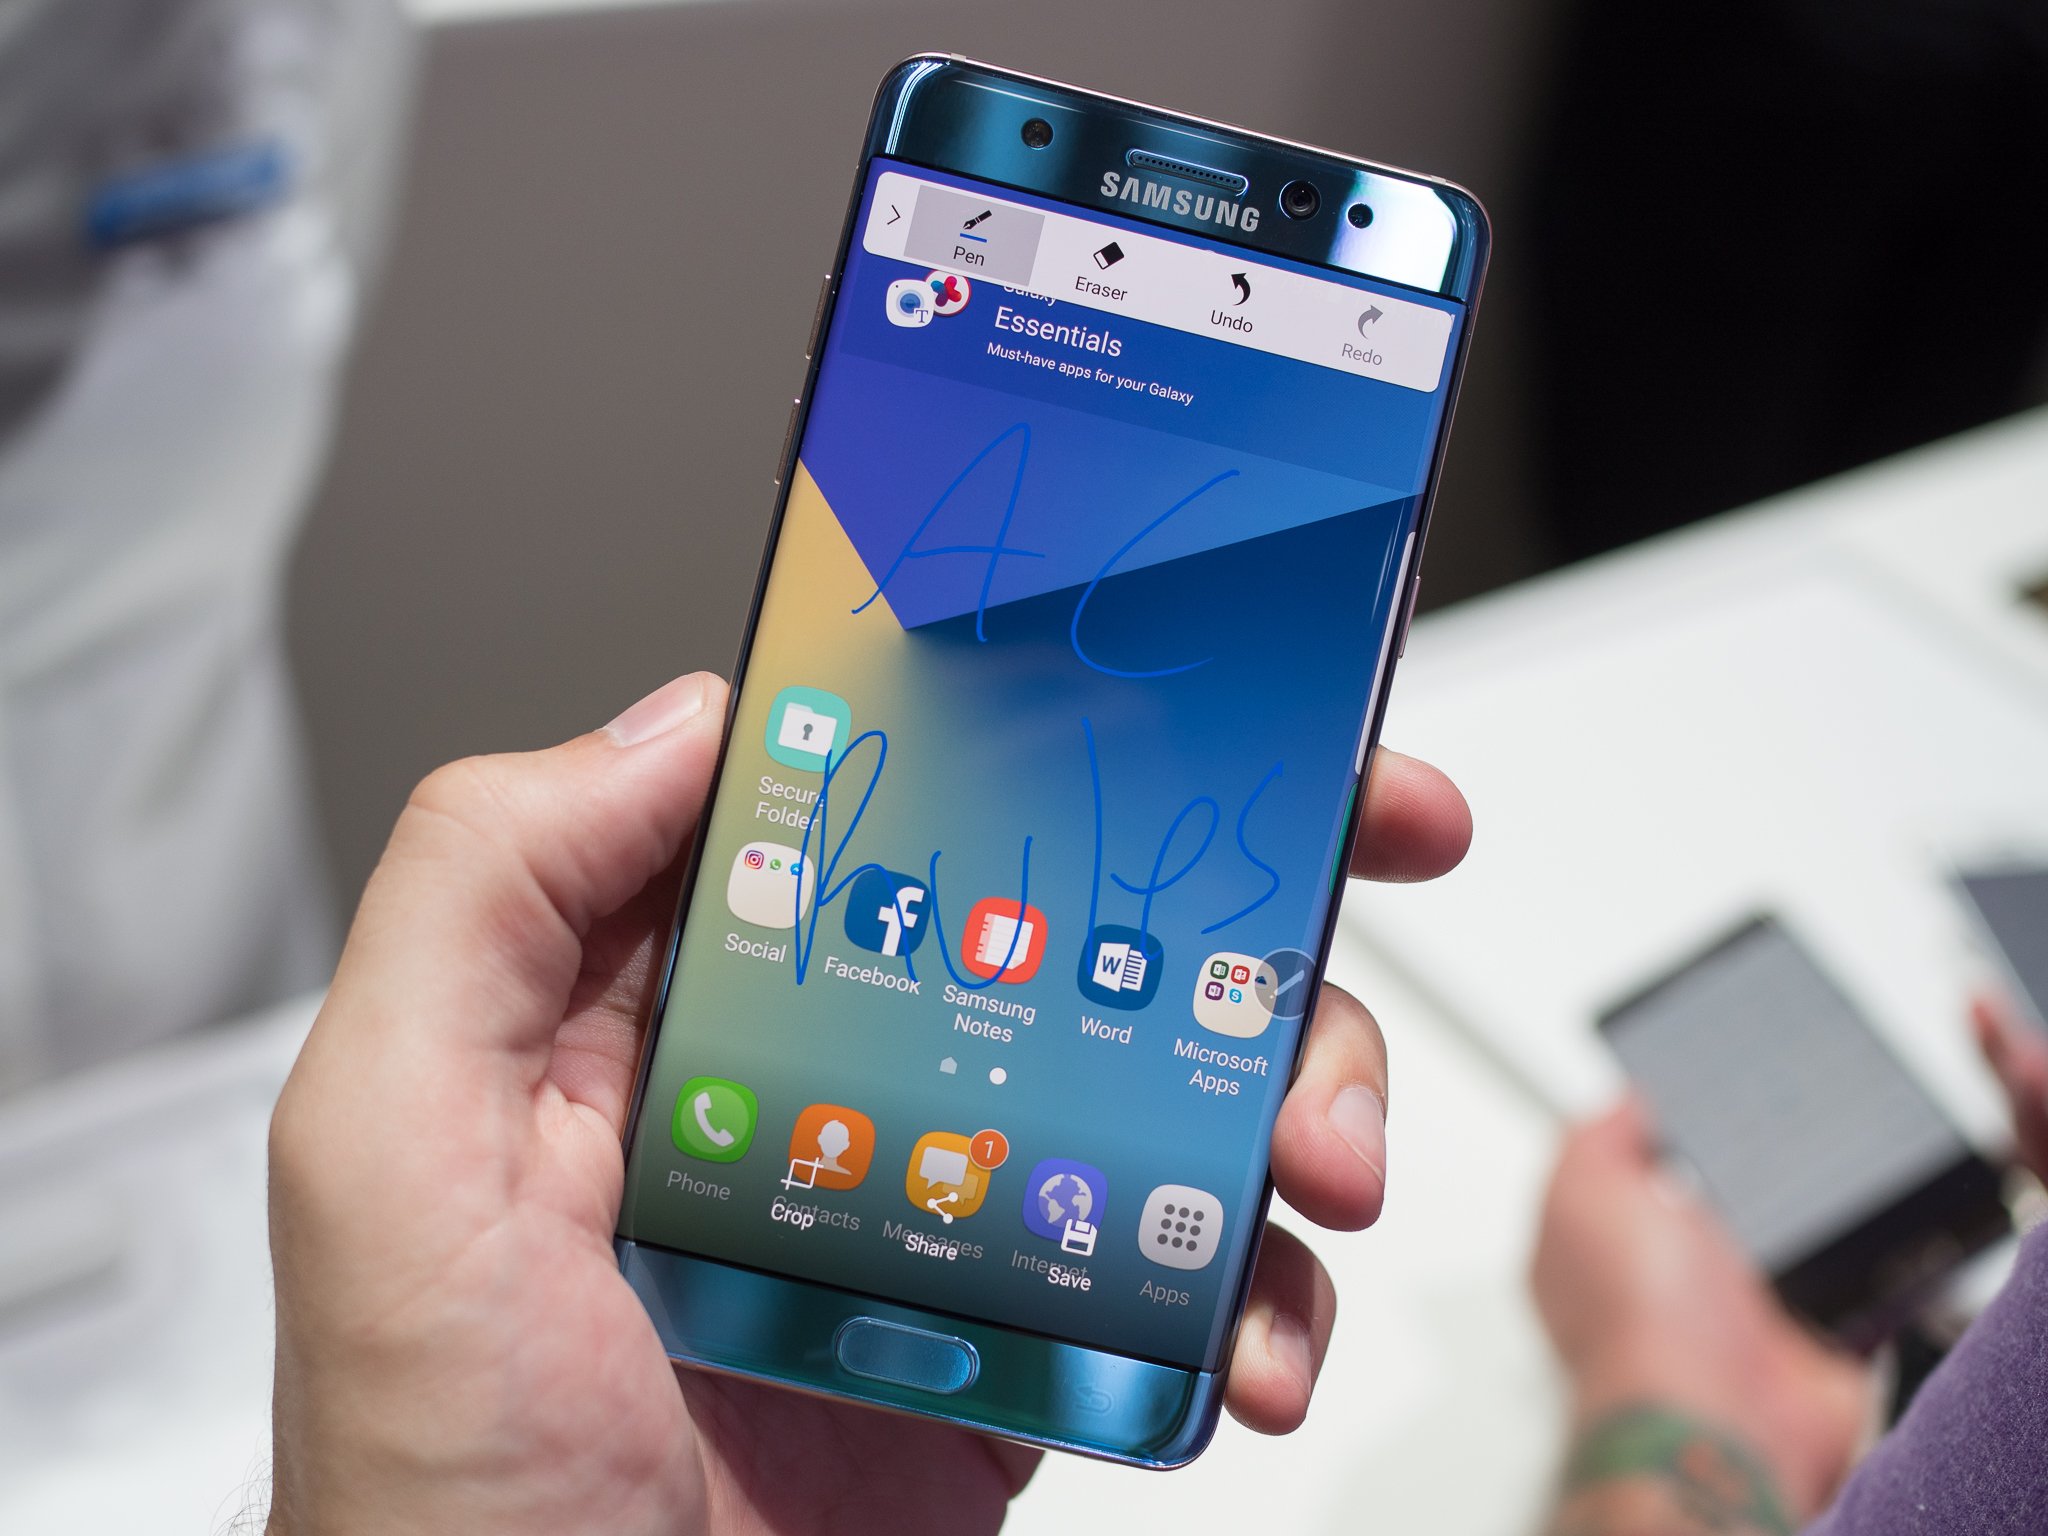 How to take a screenshot on the Samsung Galaxy Note 7